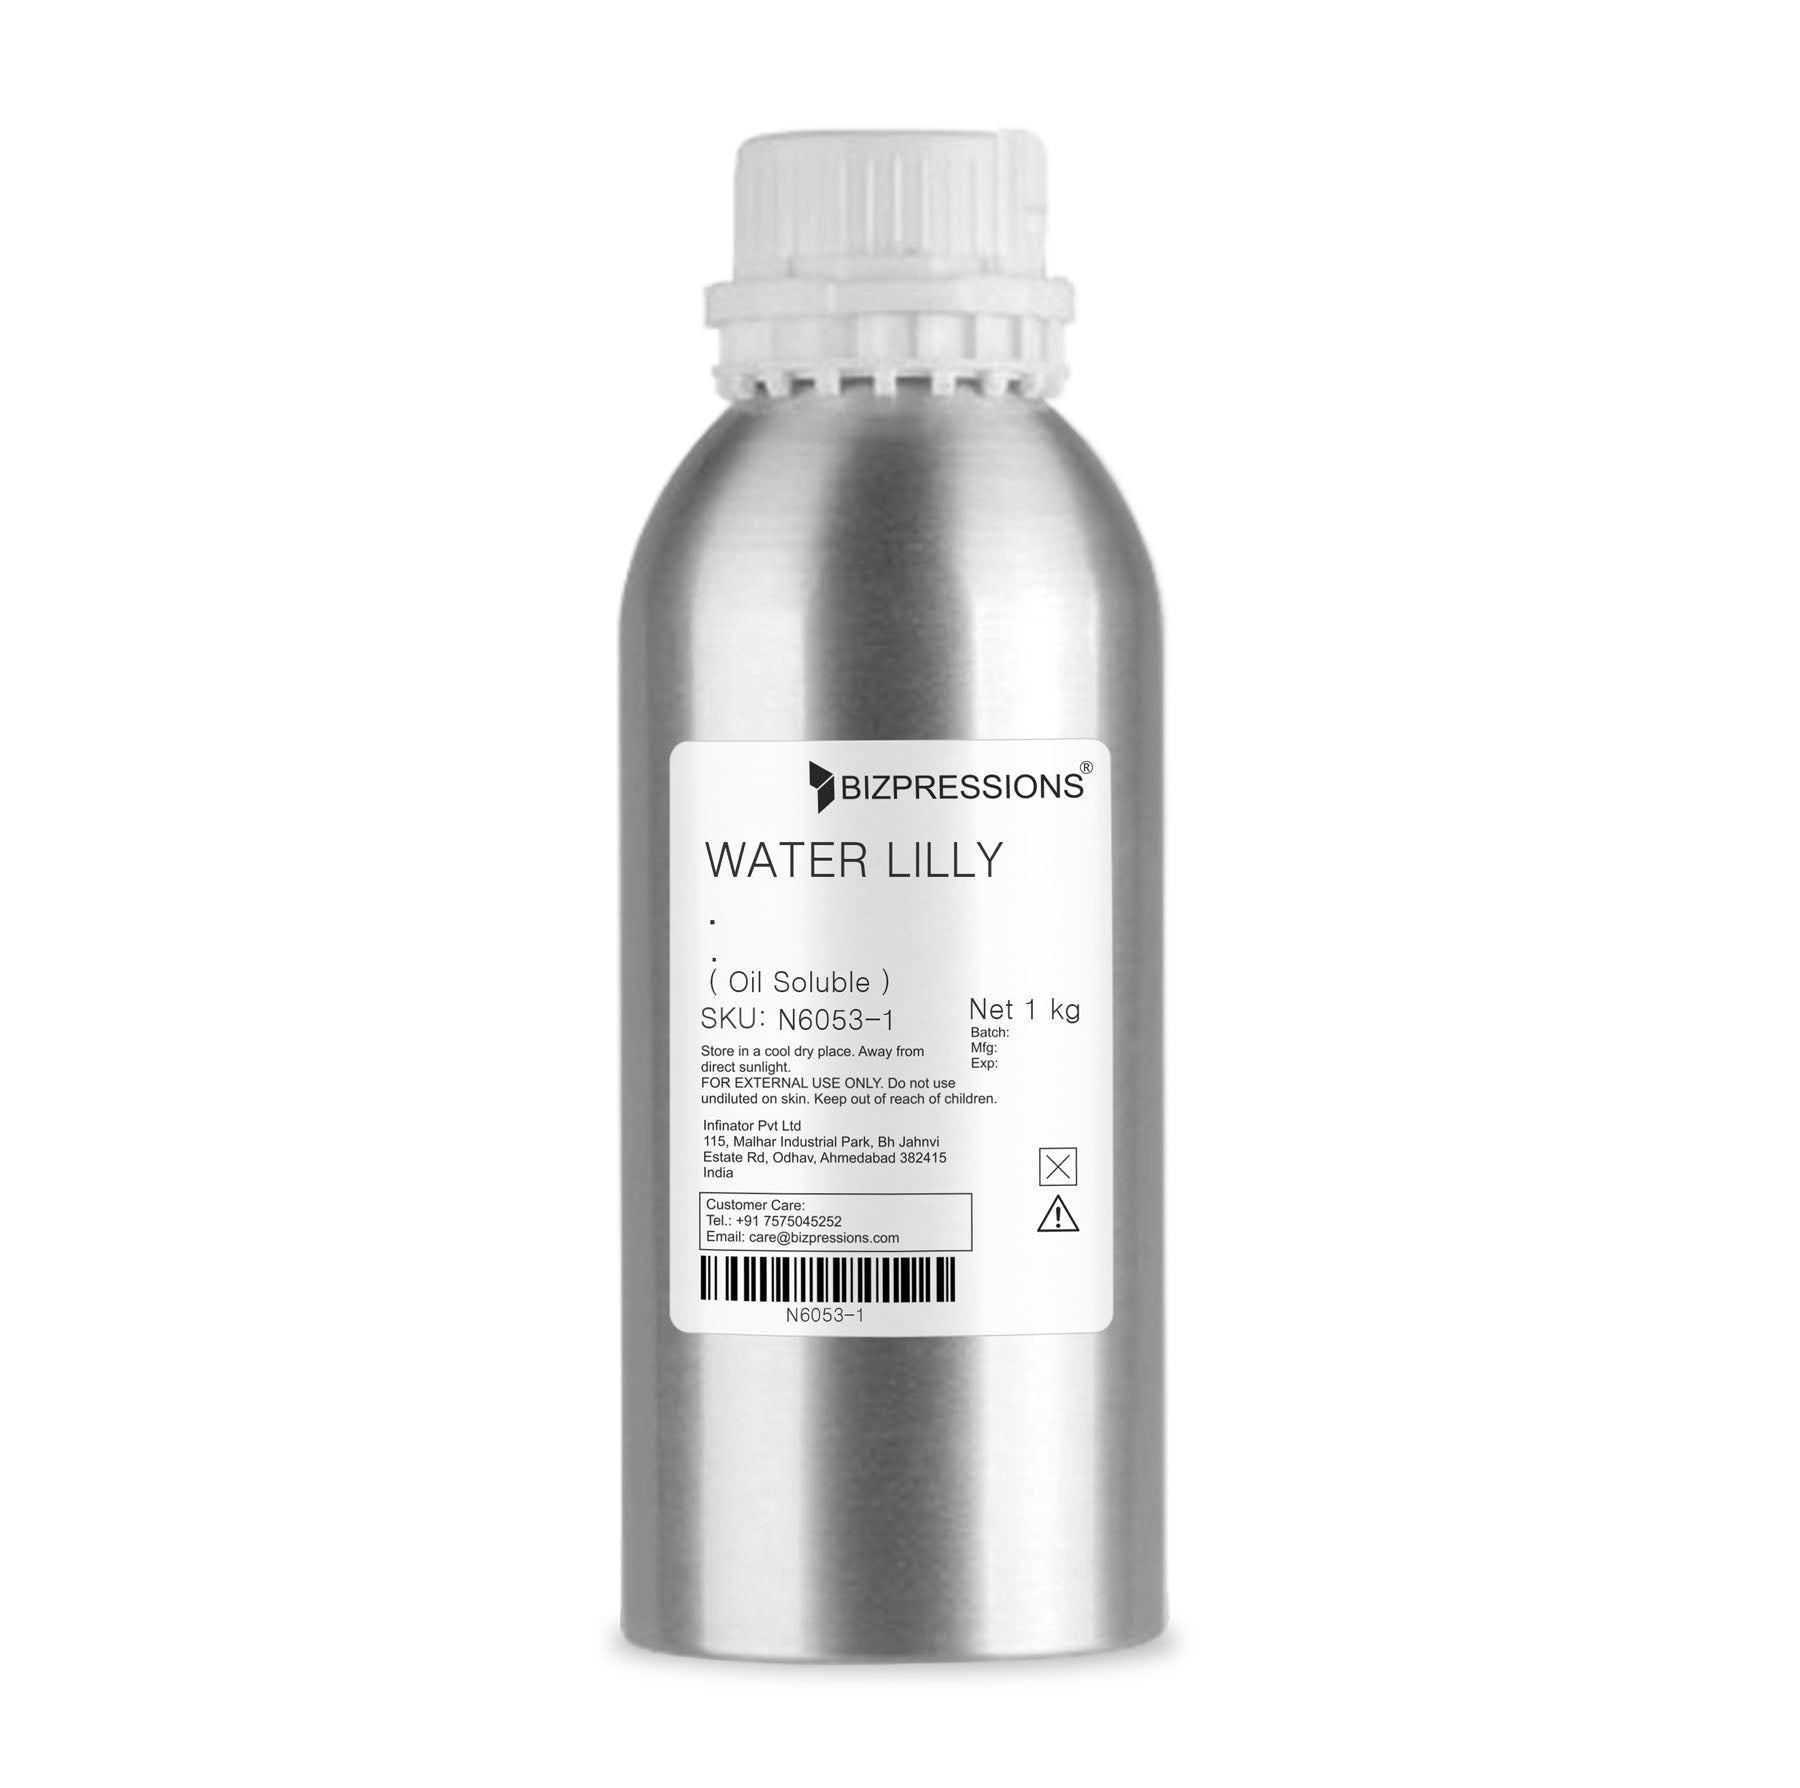 WATER LILLY - Fragrance ( Oil Soluble ) - 1 kg